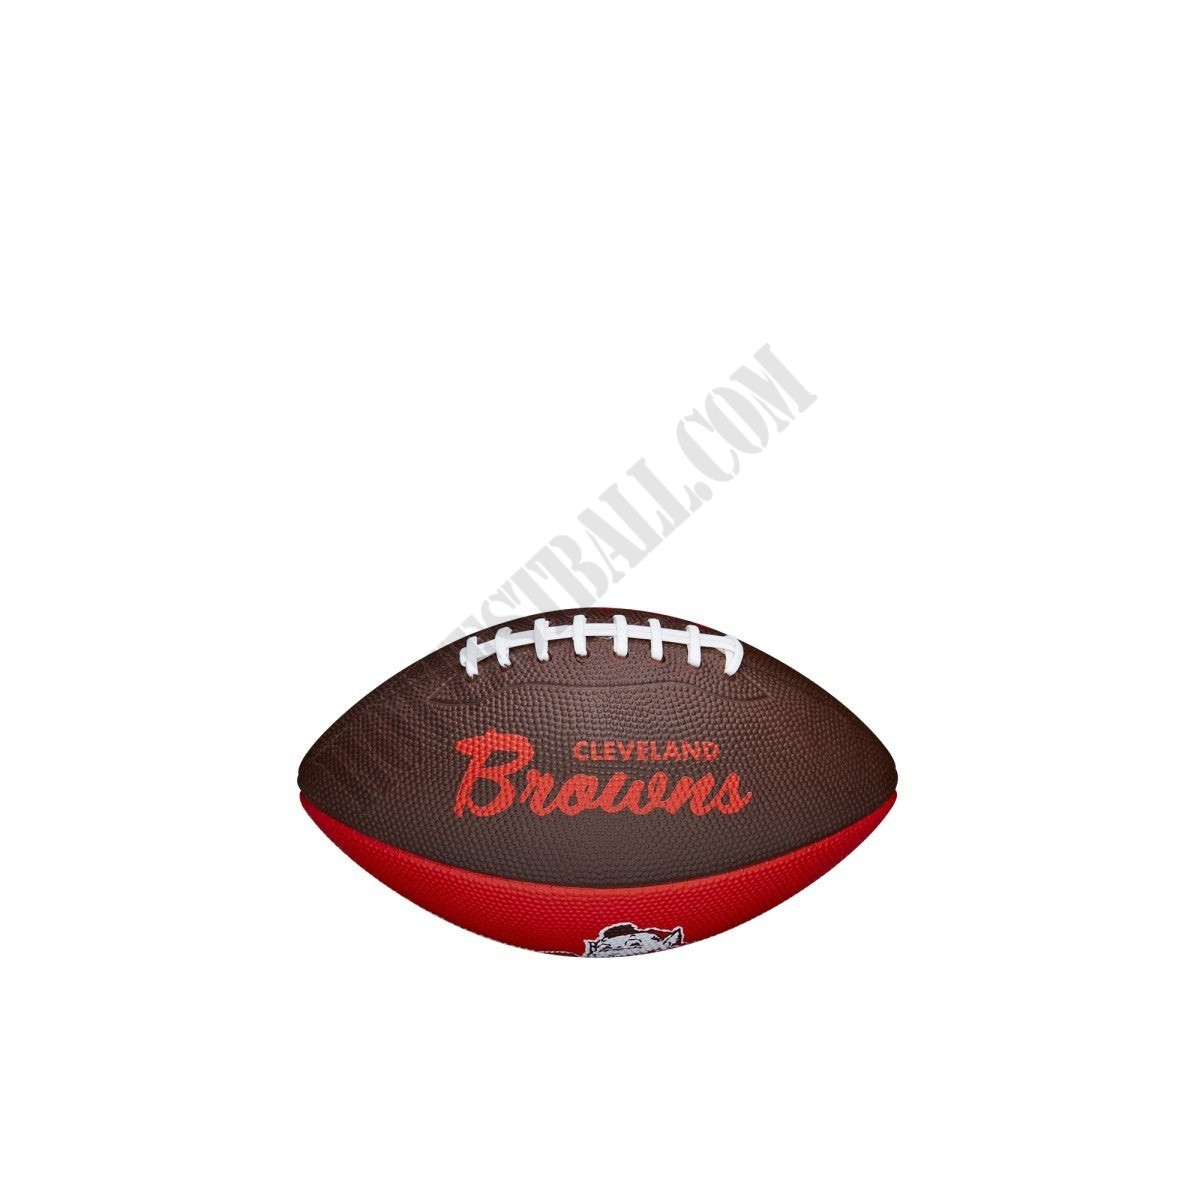 NFL Retro Mini Football - Cleveland Browns ● Wilson Promotions - -0